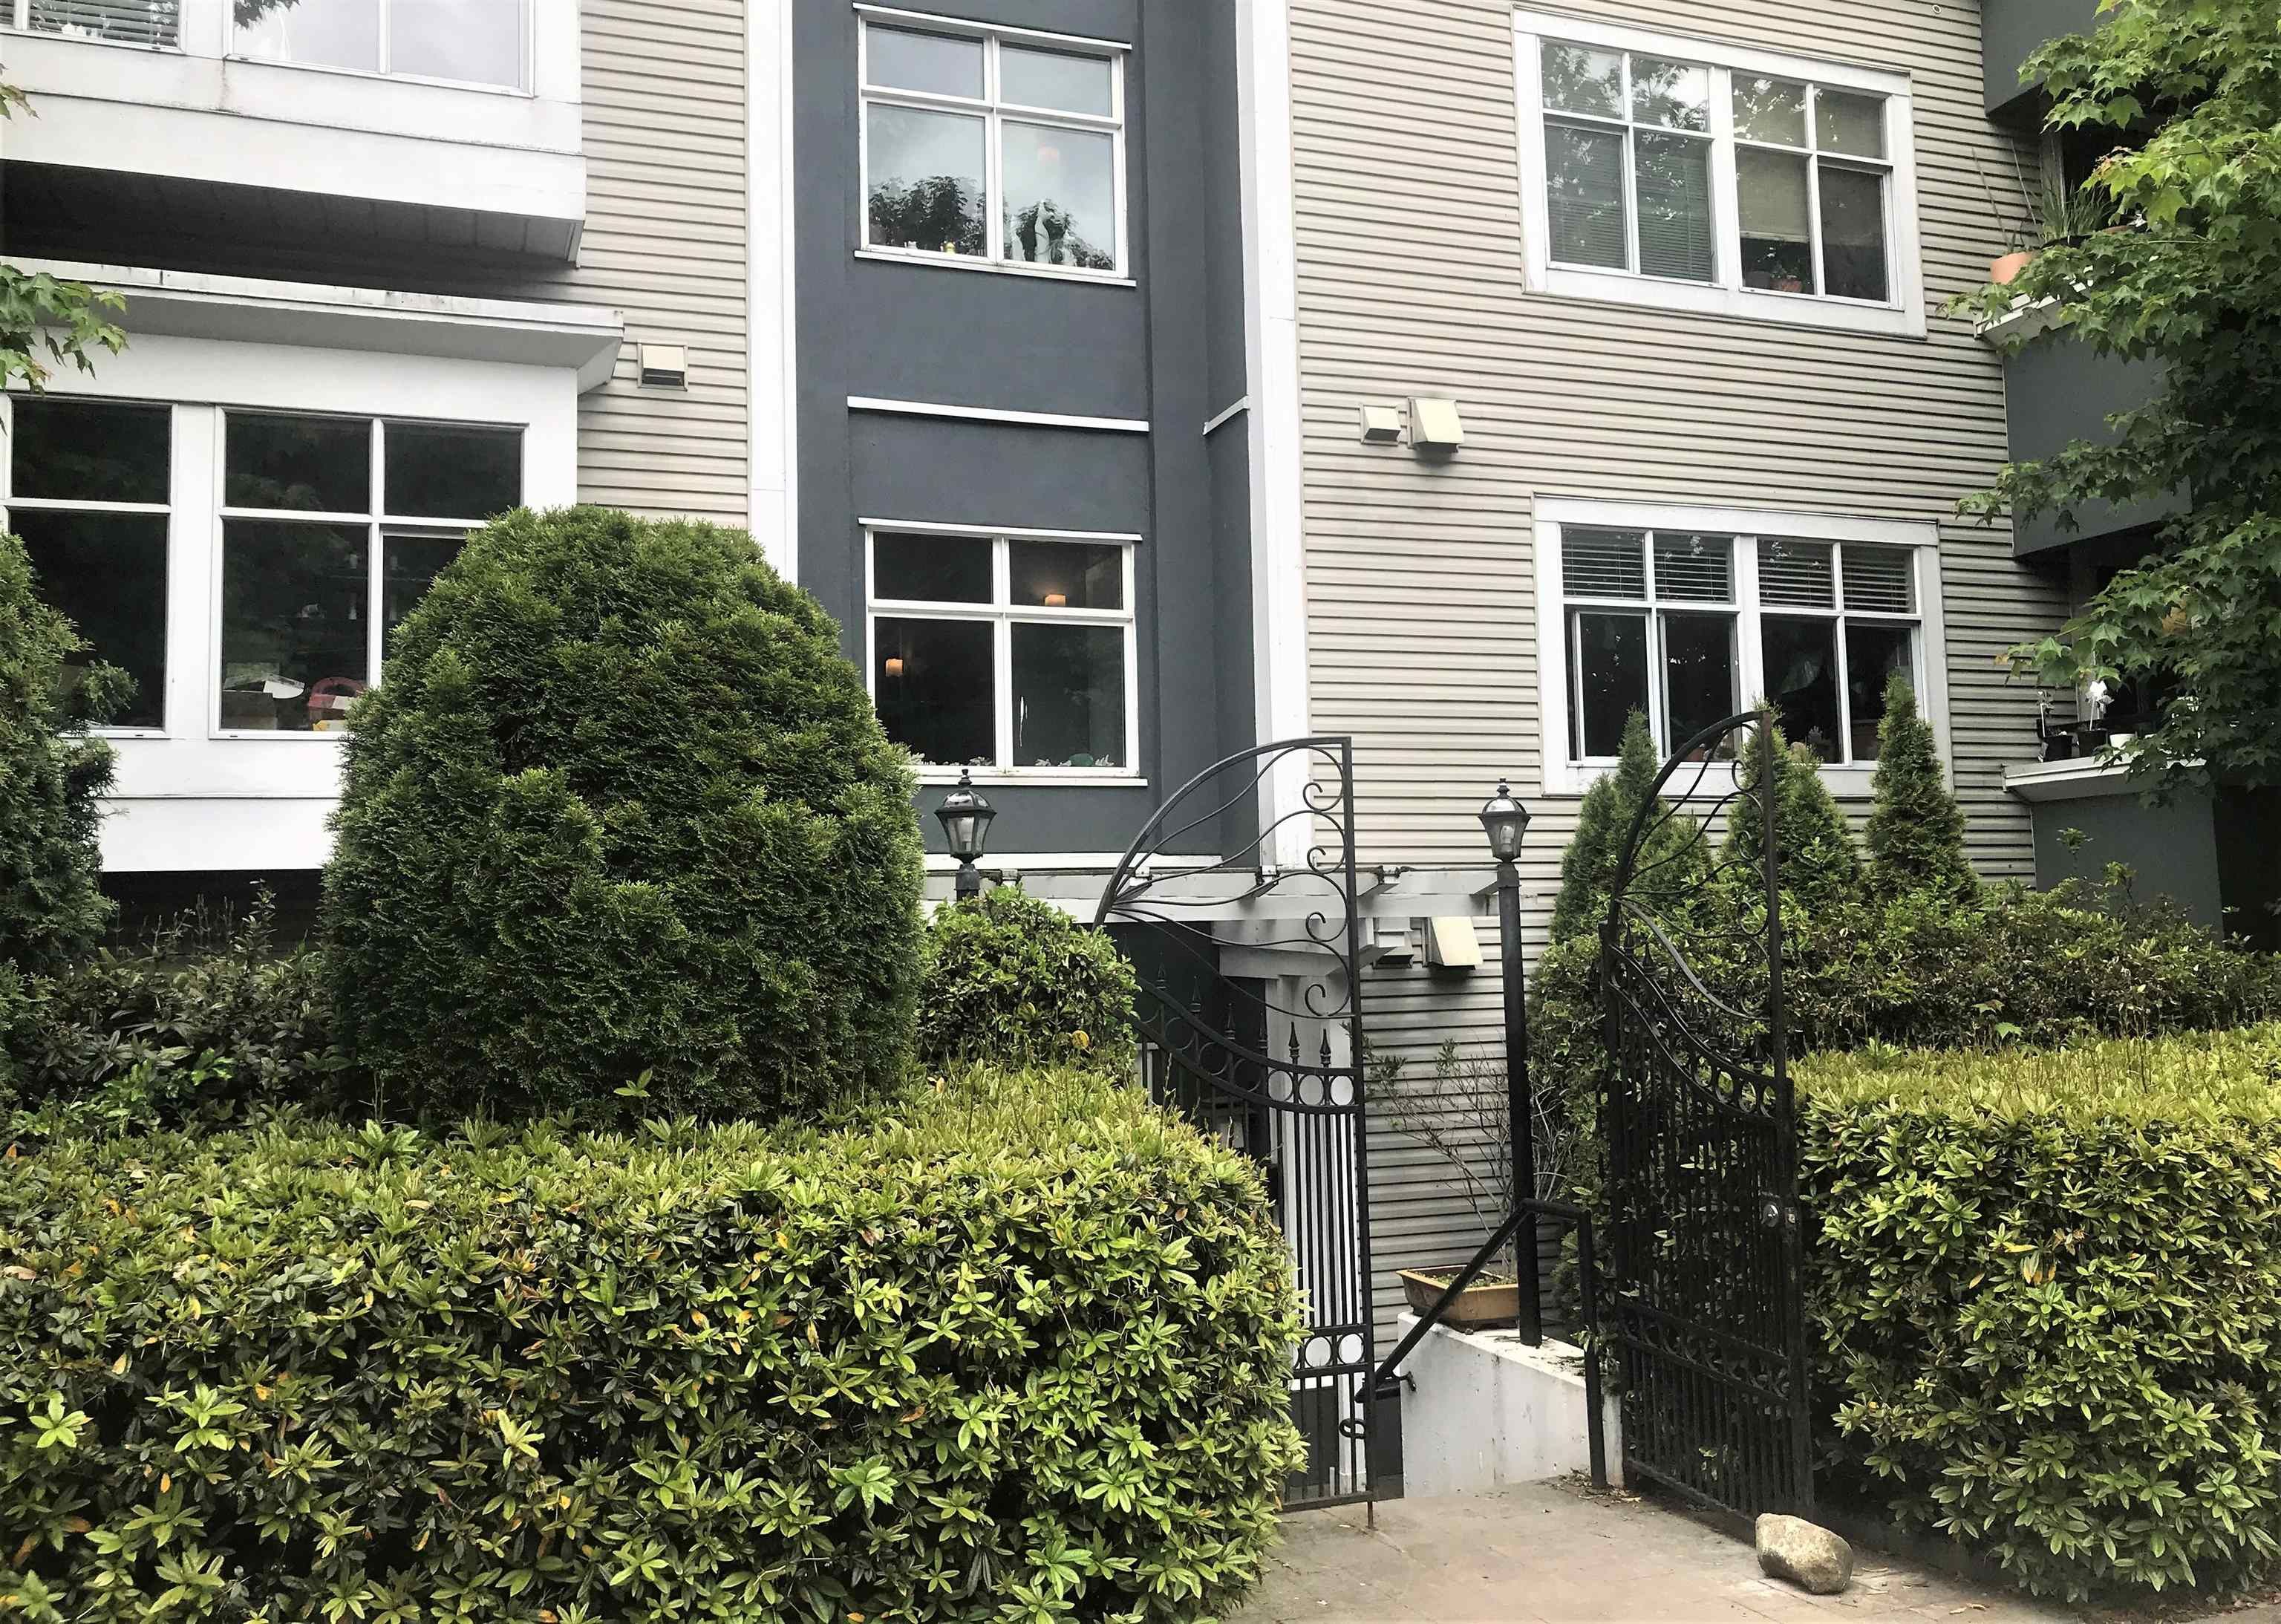 Open House. Open House on Sunday, May 29, 2022 2:00PM - 4:00PM